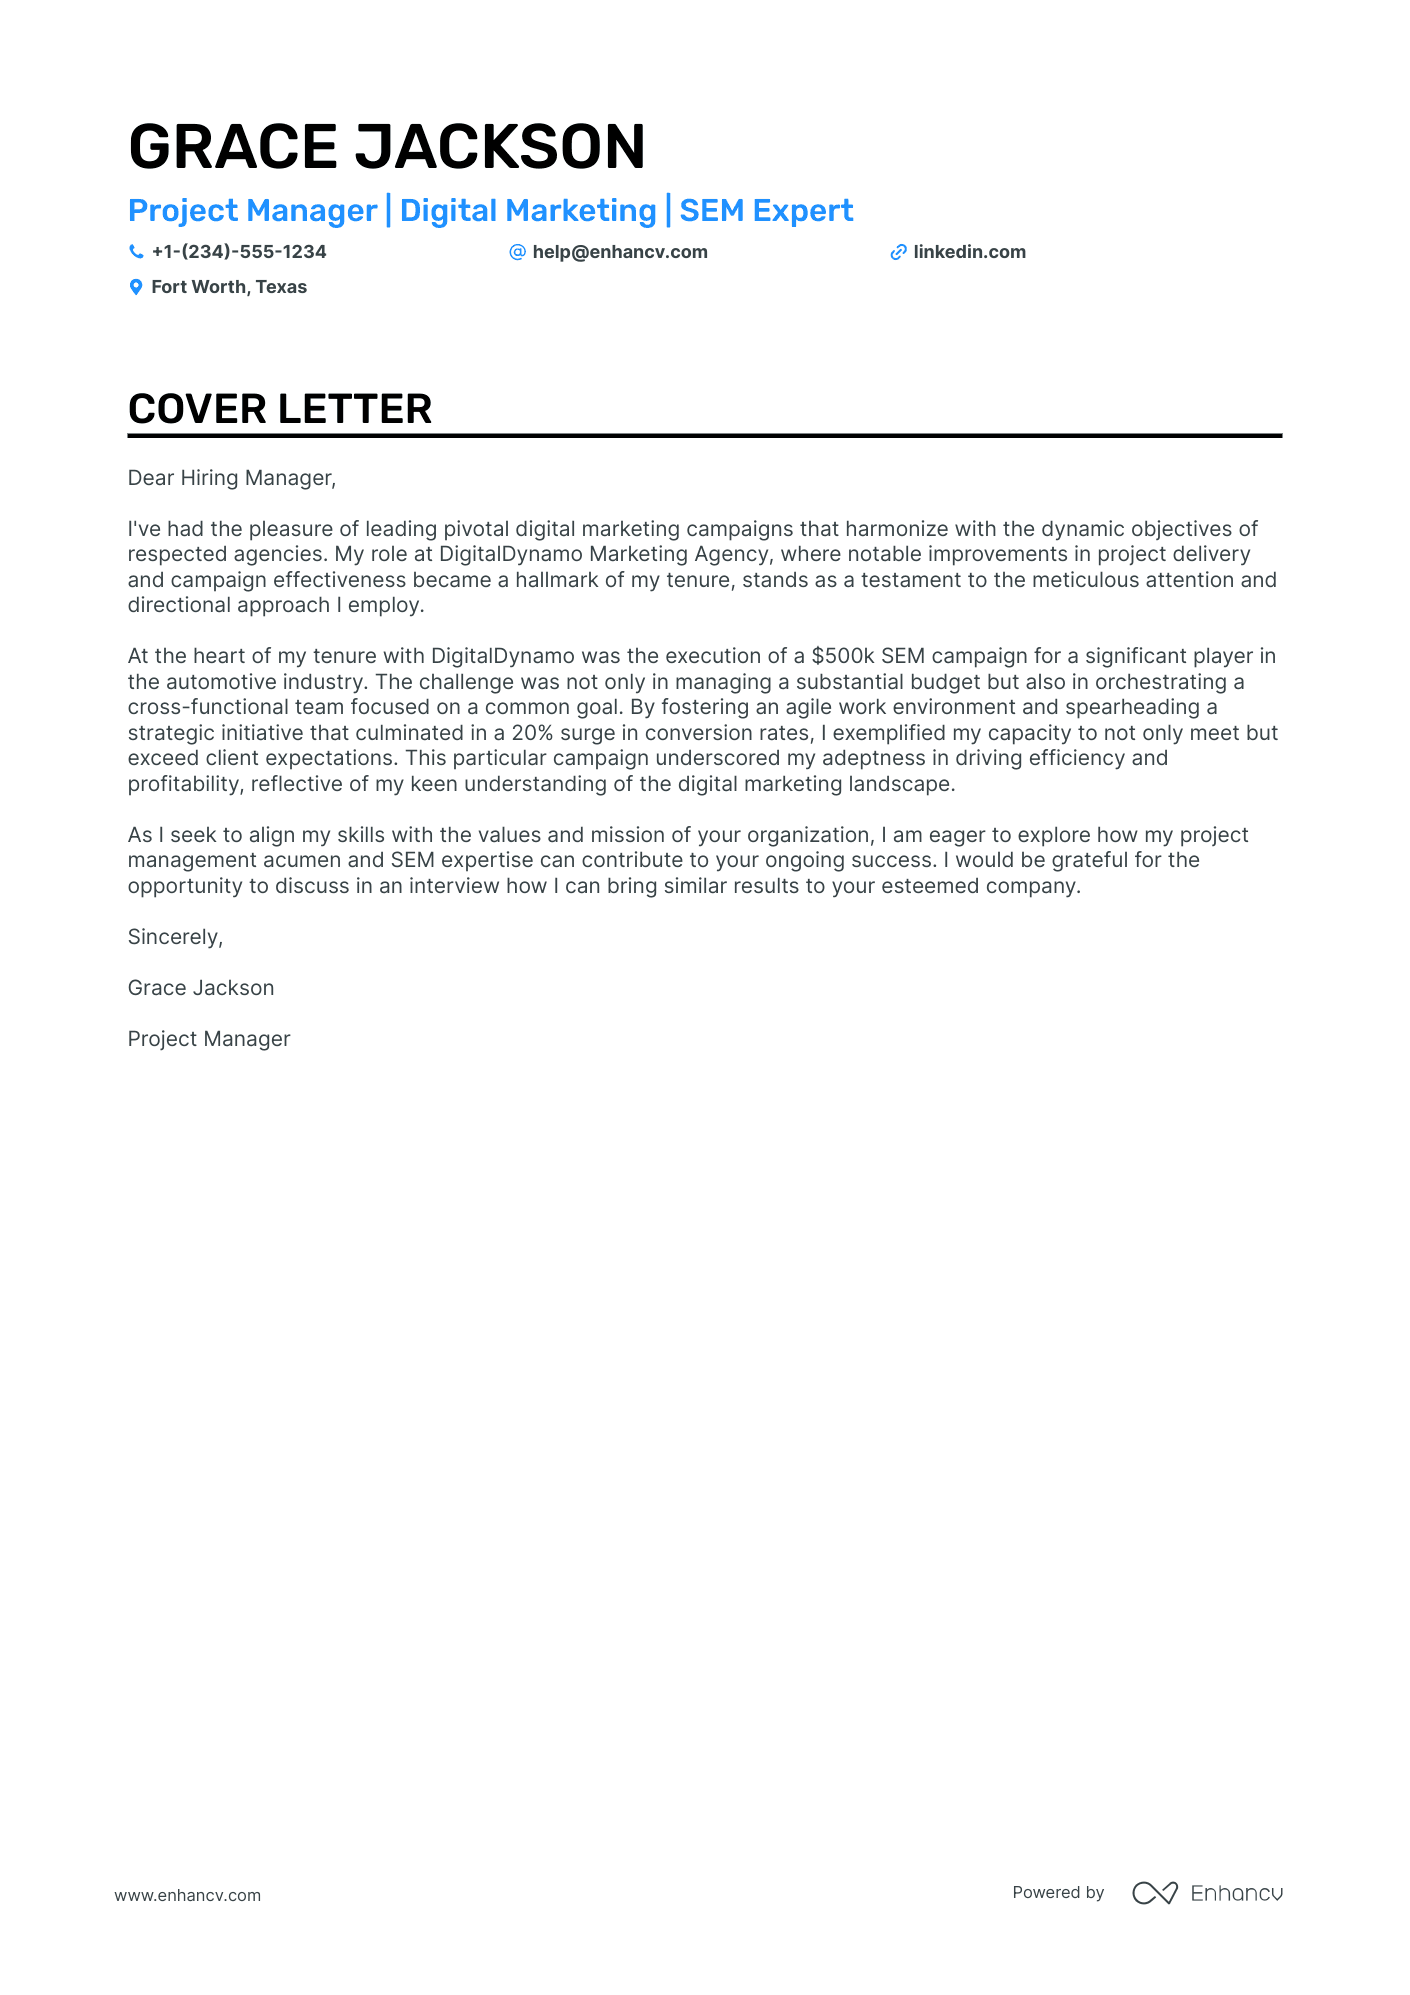 Freelance Project Manager cover letter